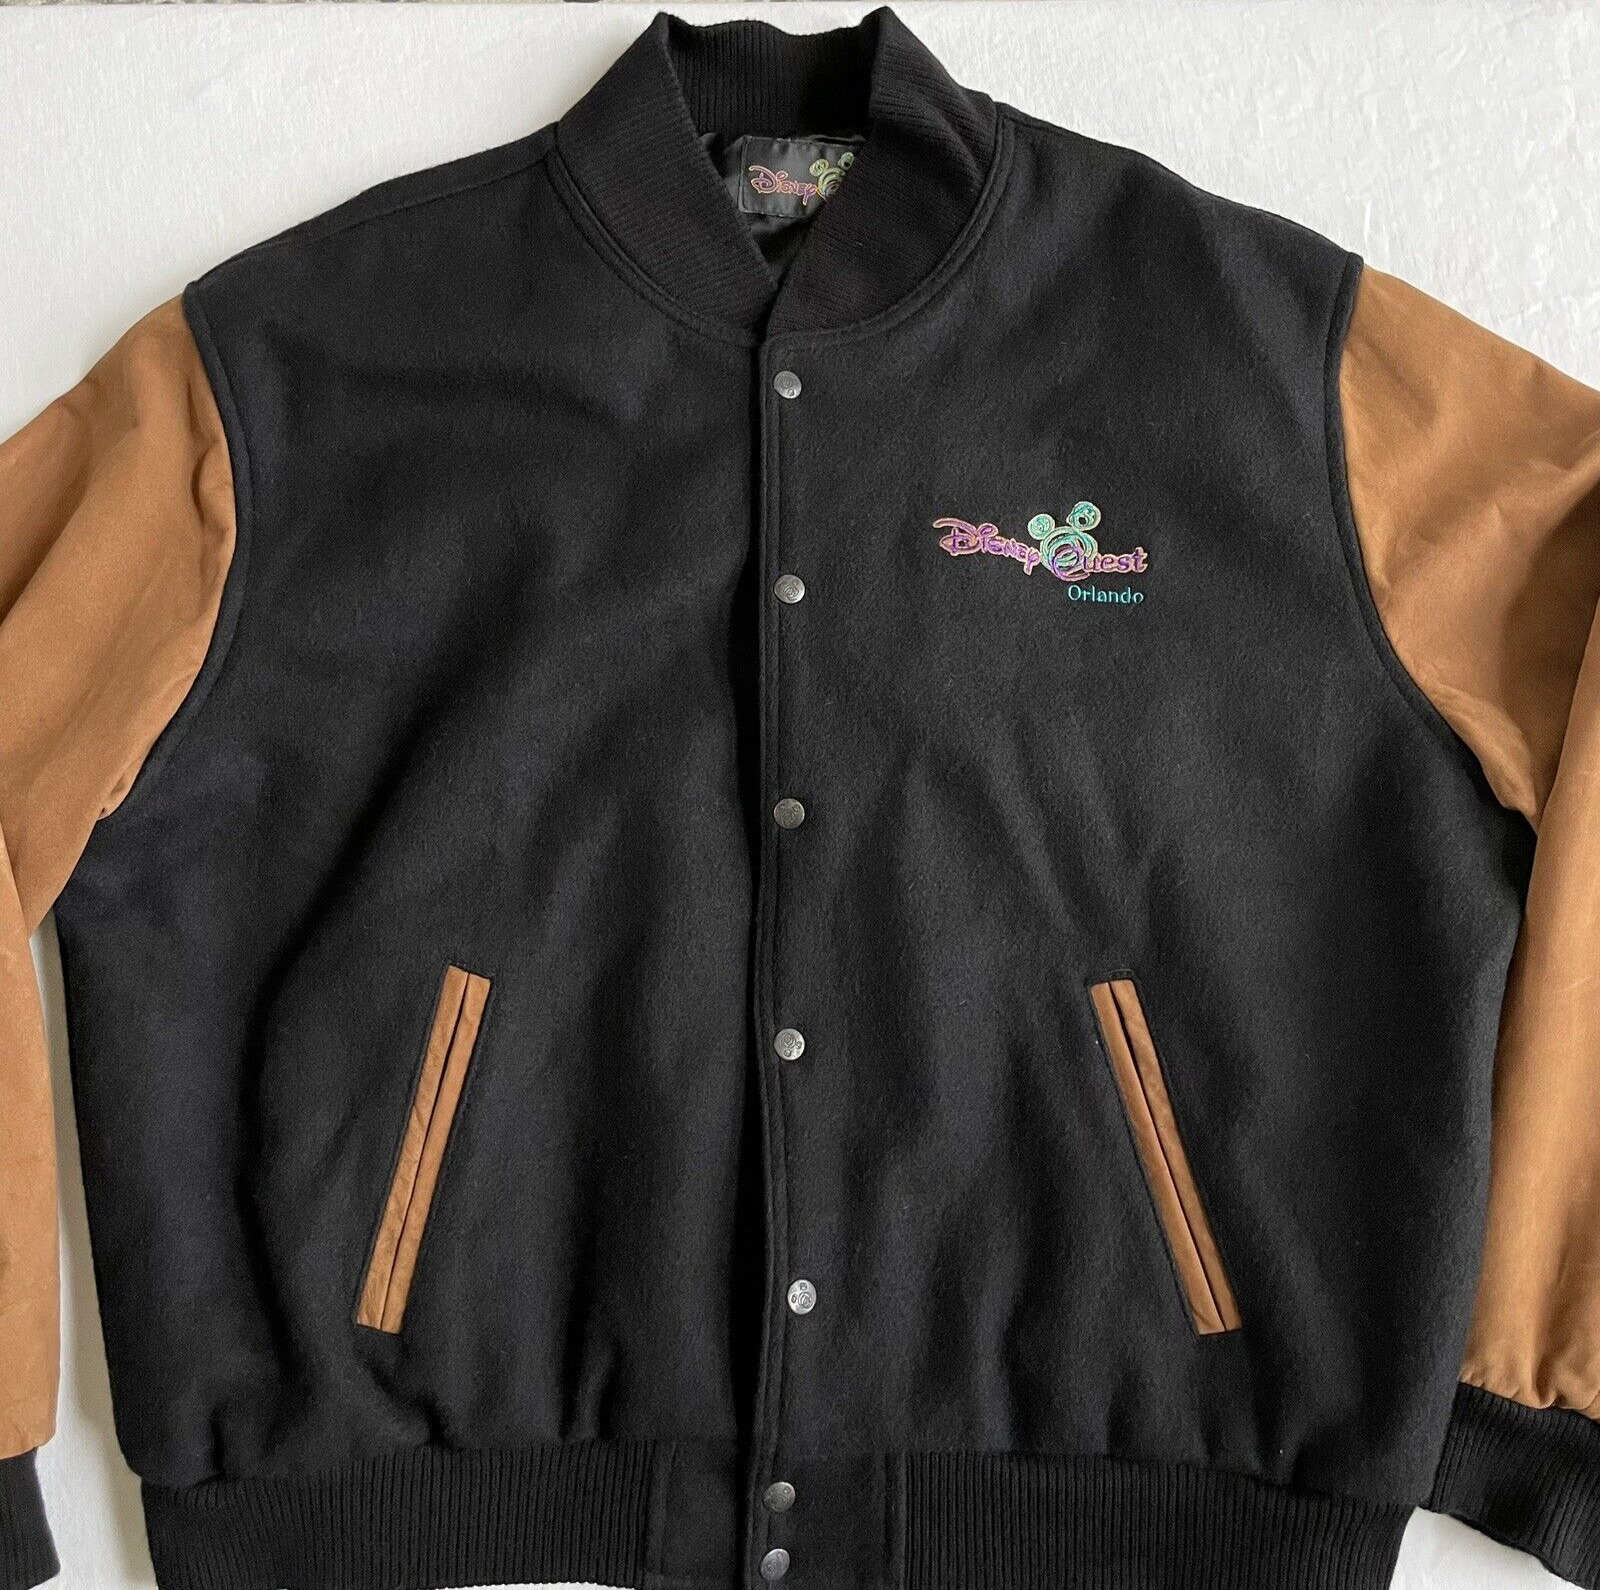 Vintage DISNEY QUEST Bomber JACKET 2XL Embroidered Wool Leather Disney Springs